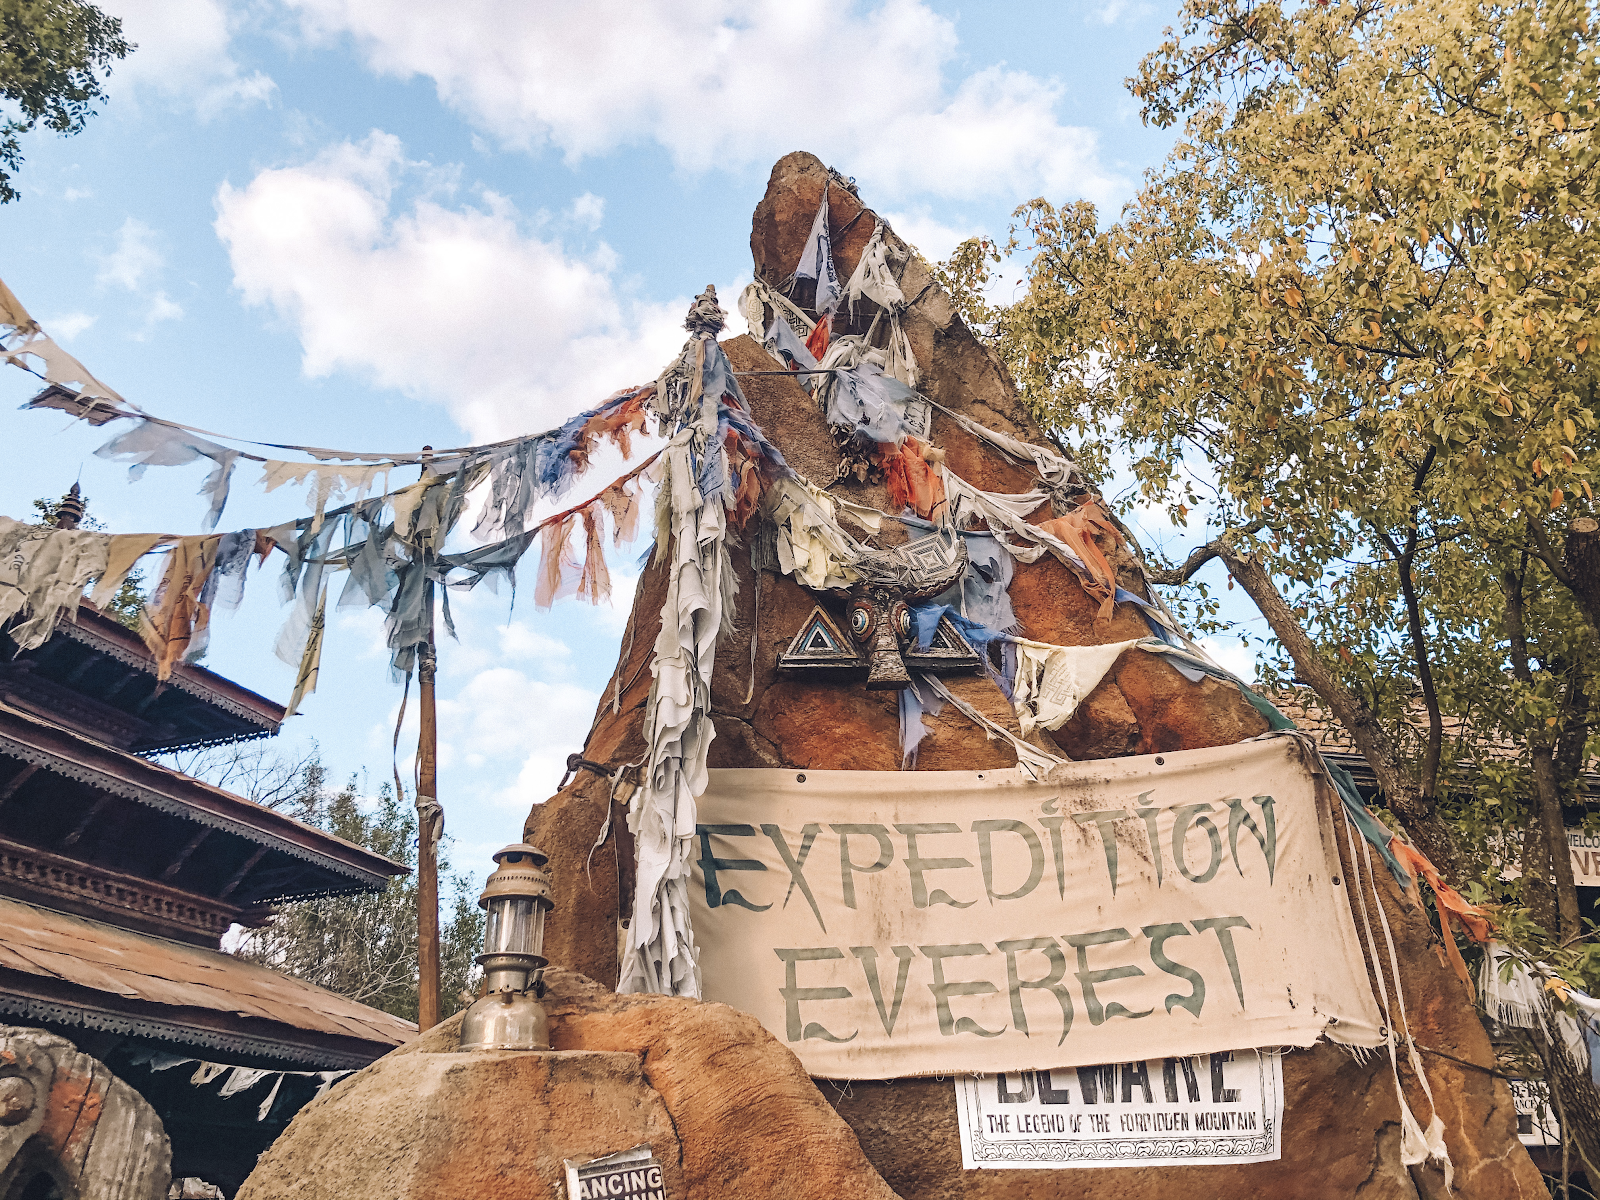 Expedition Everest Overview | Disney's Animal Kingdom Attractions